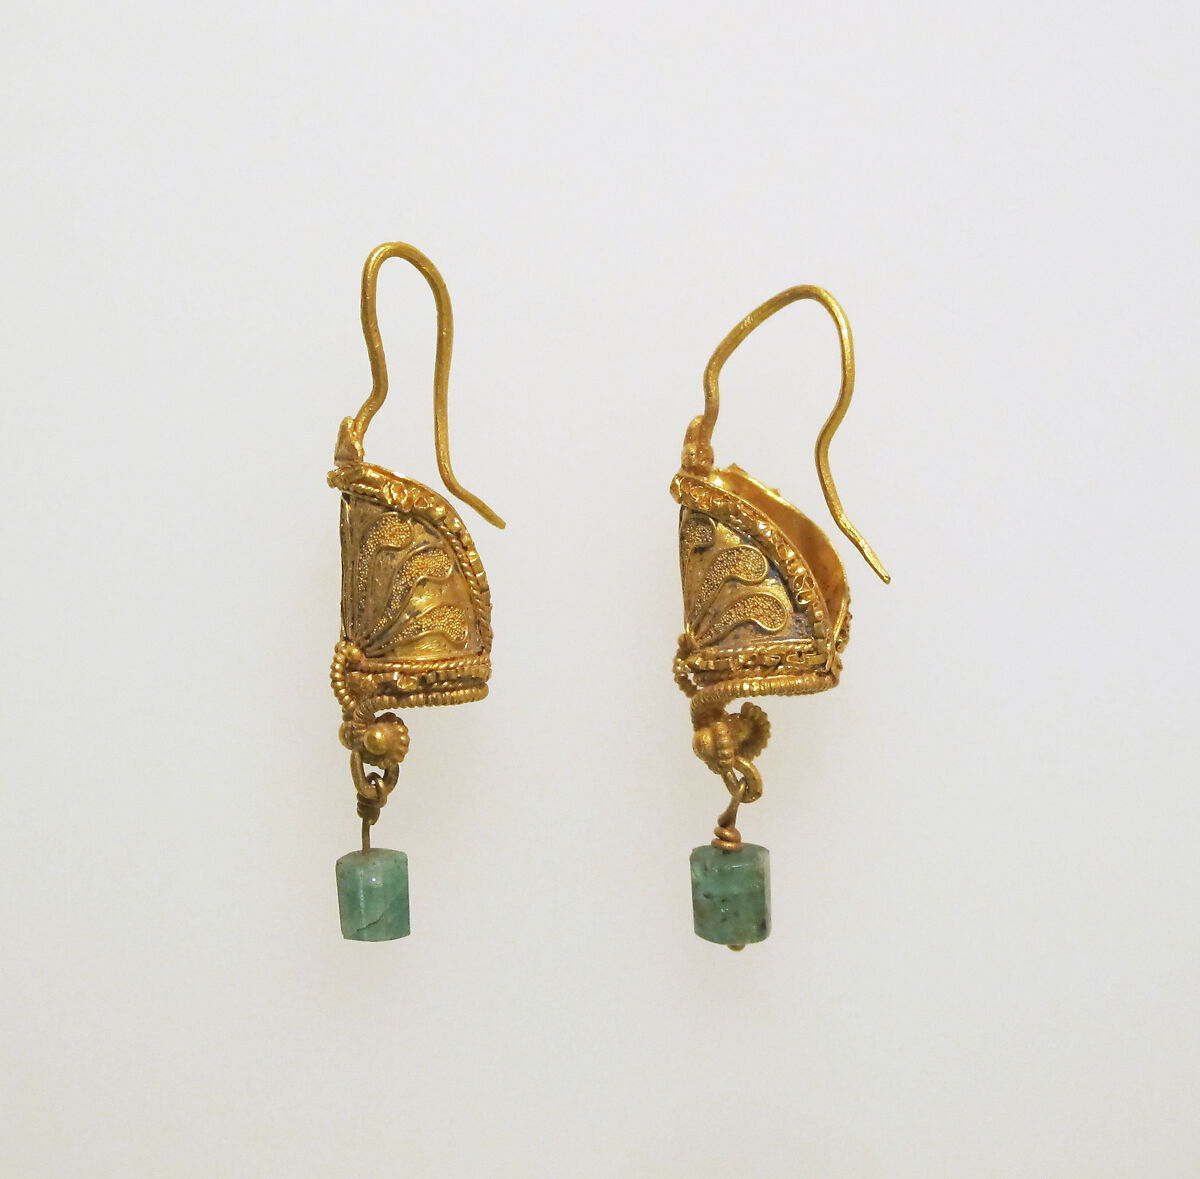 Earring in the form of a shield, Gold 